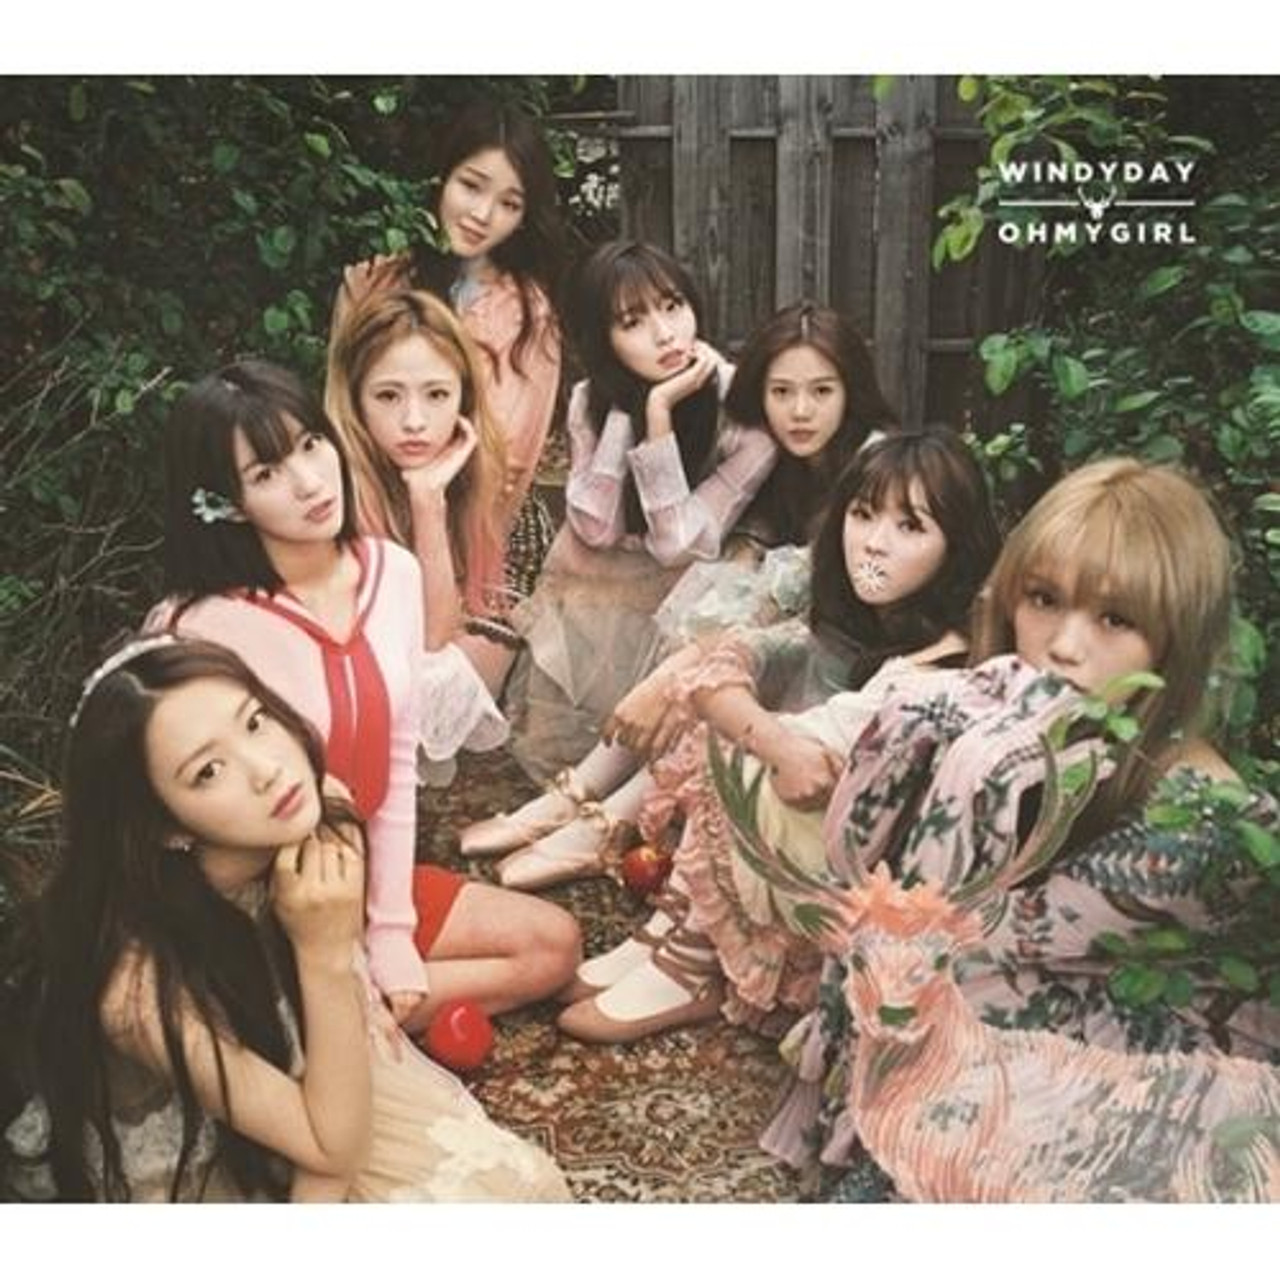 Oh My Girl  3rd Min Repackage / Windy day